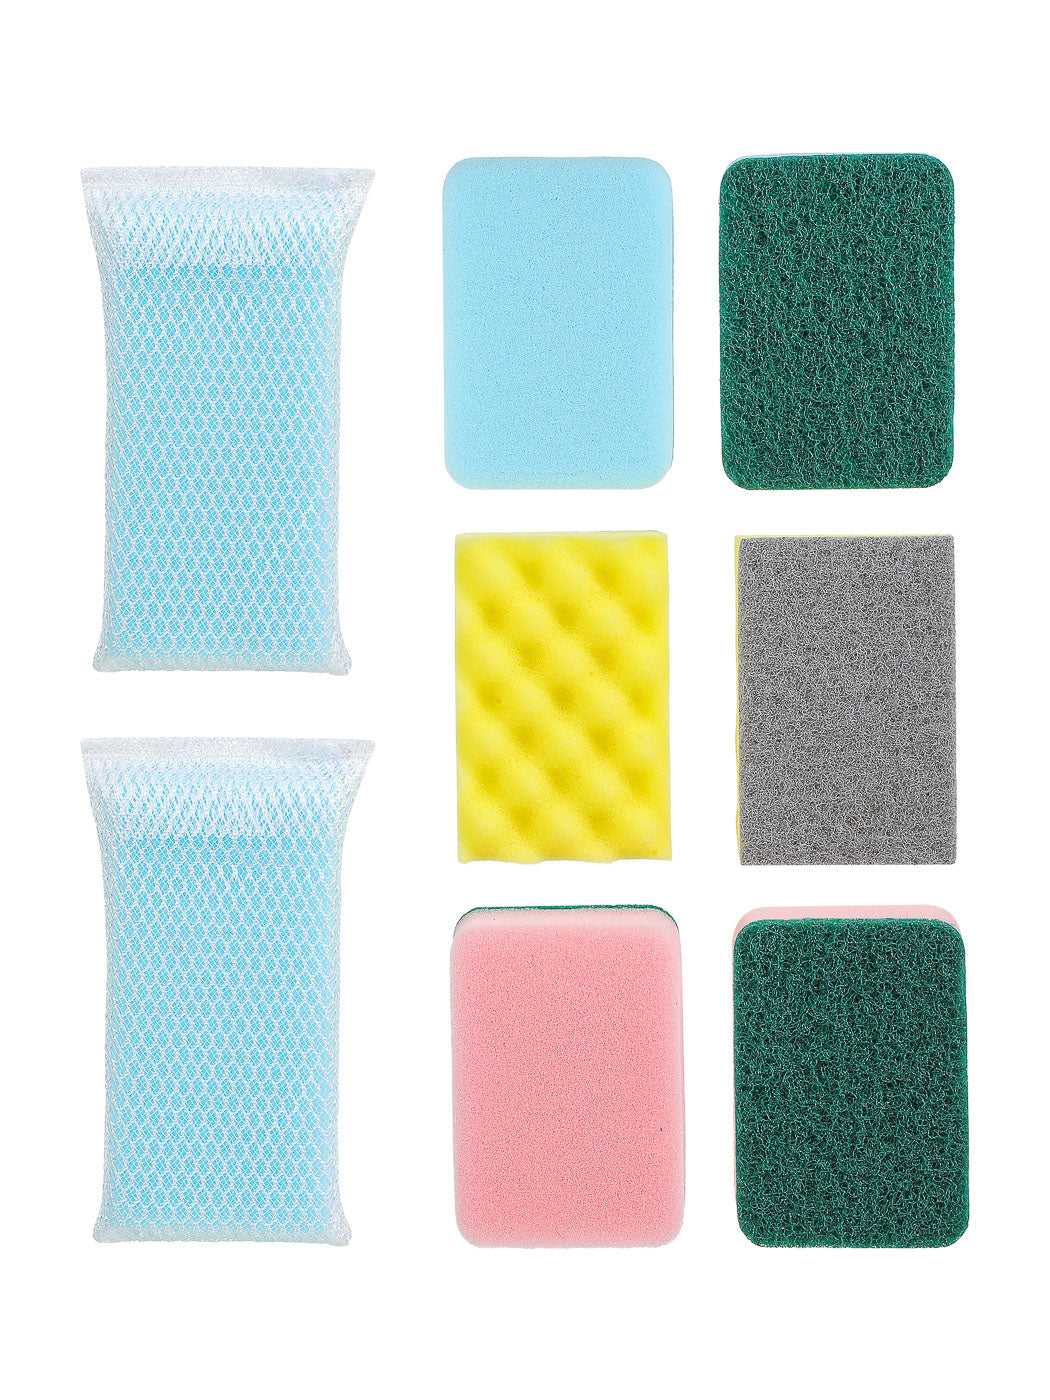 MINISO CLEANING SPONGE 2010008410105 CLEANING PRODUCTS